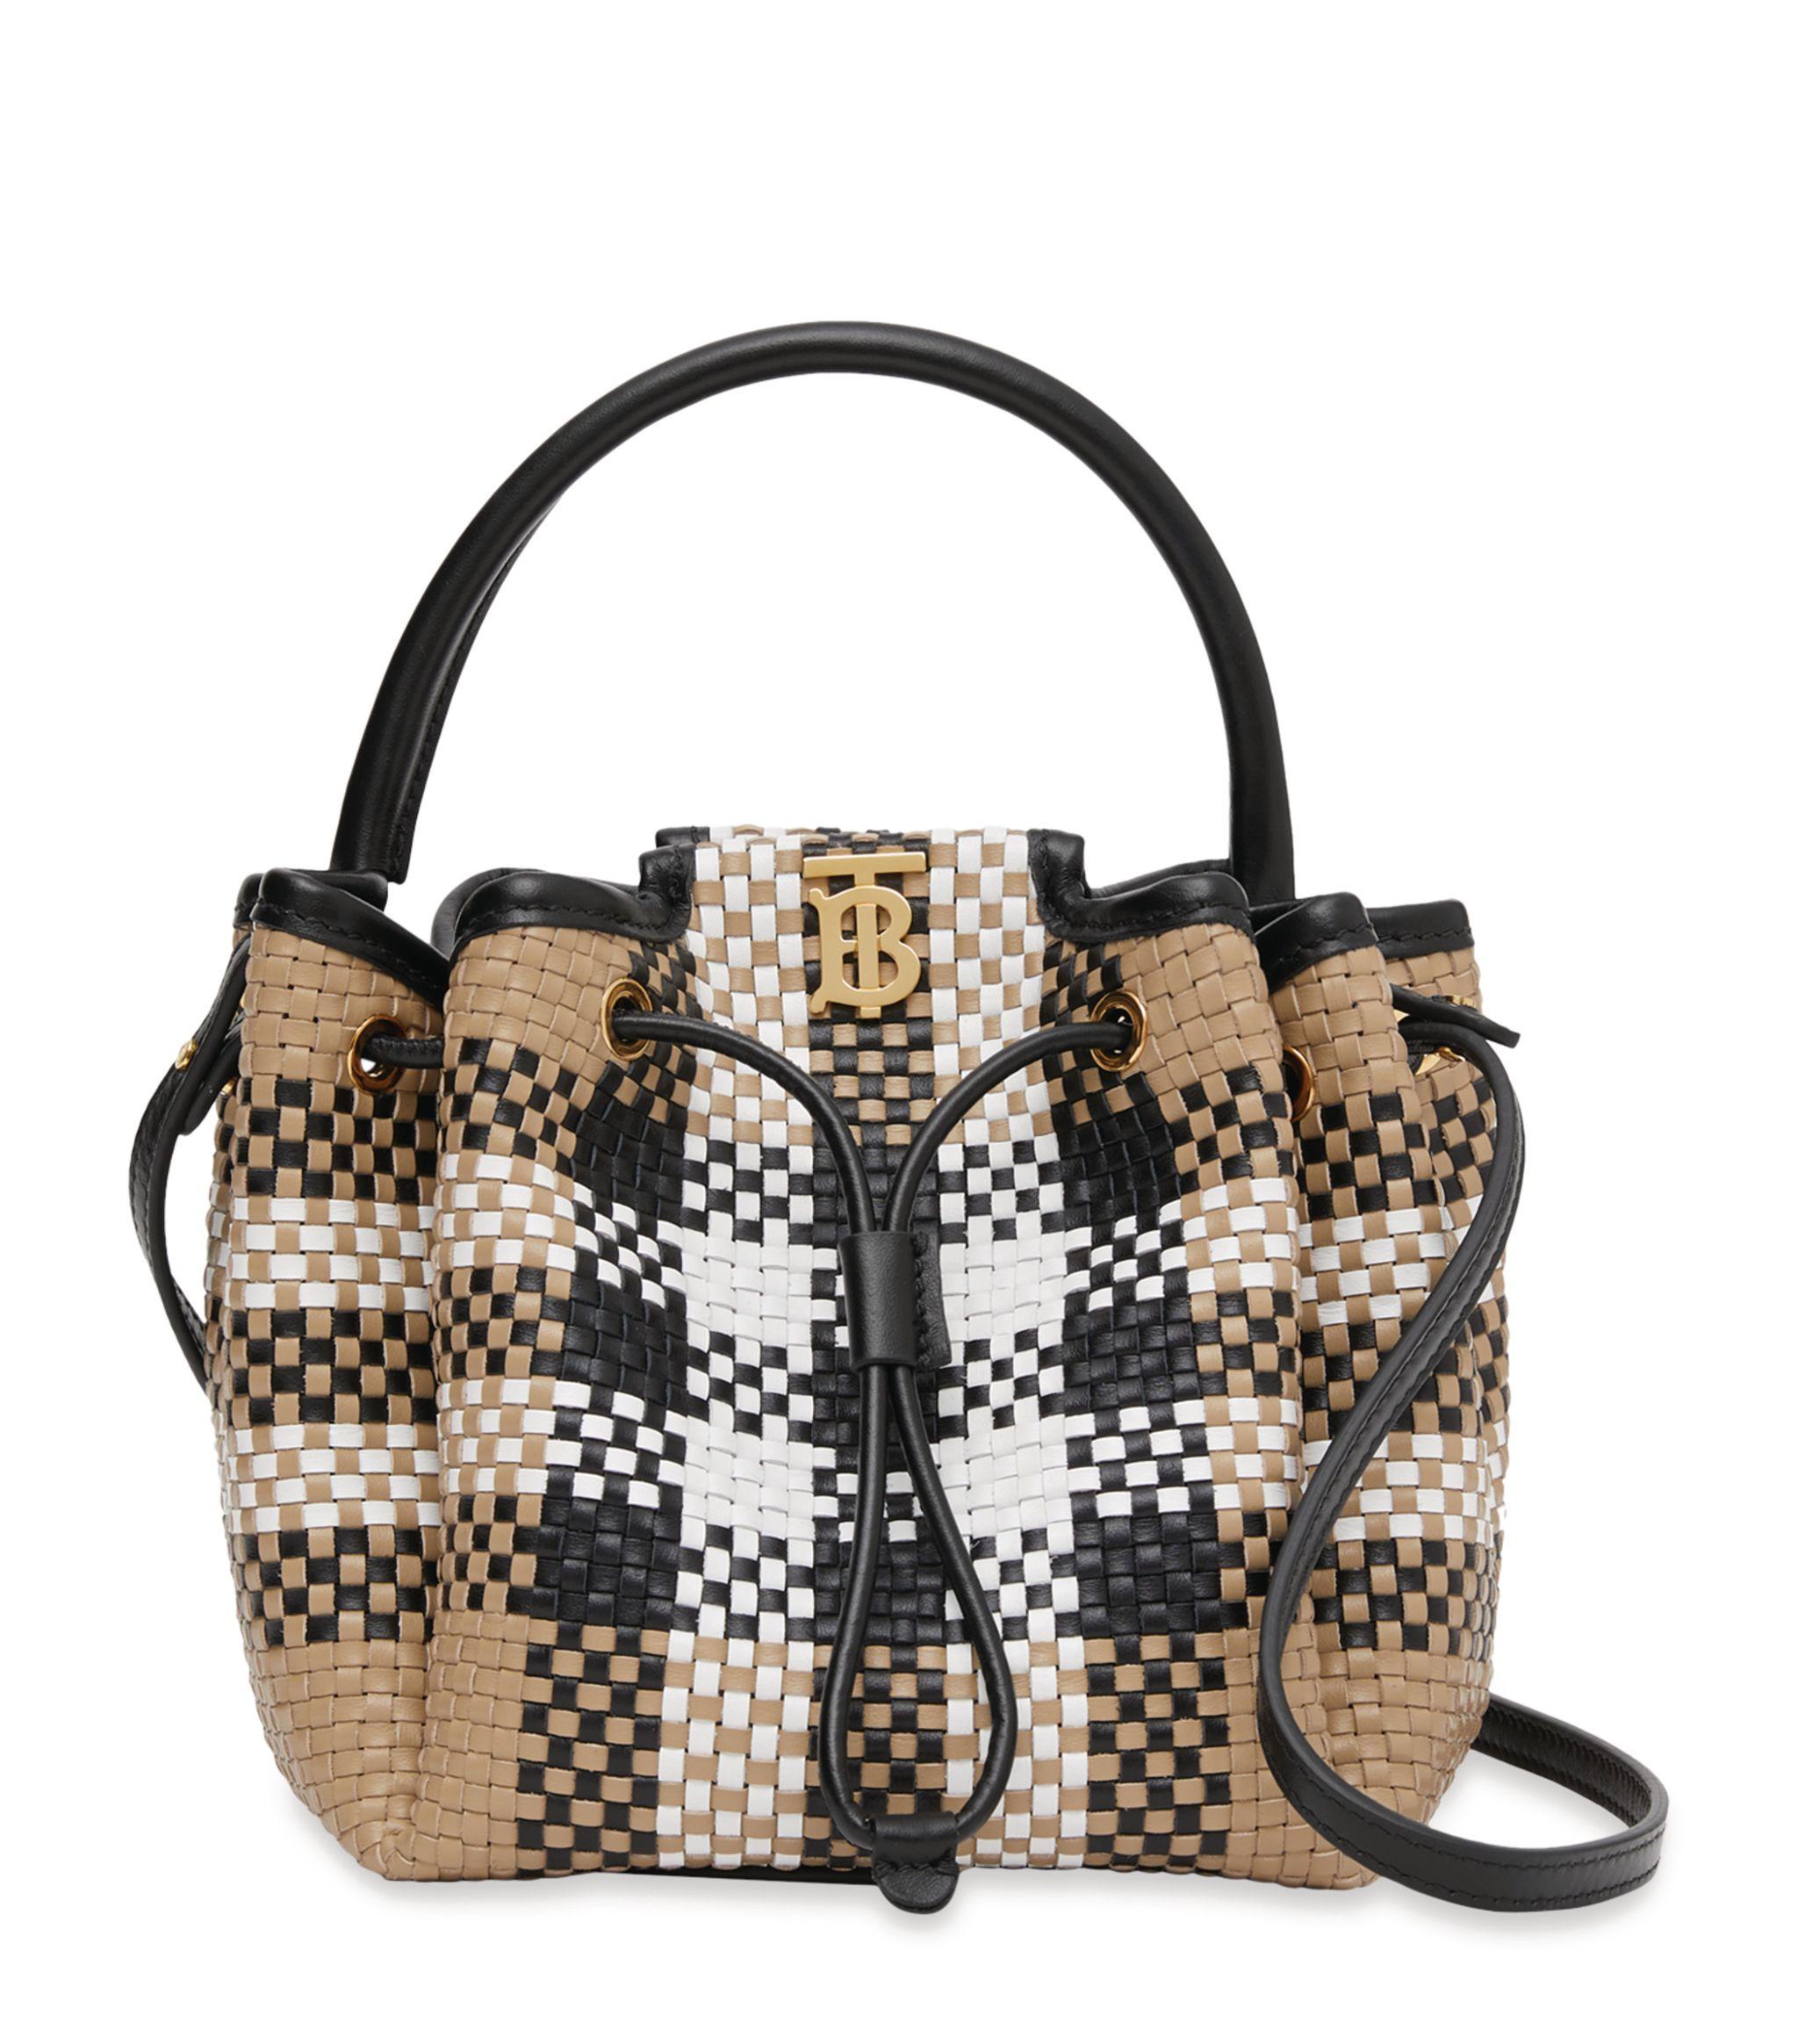 Burberry Leather Woven Check Tb Bucket Bag in Natural - Lyst